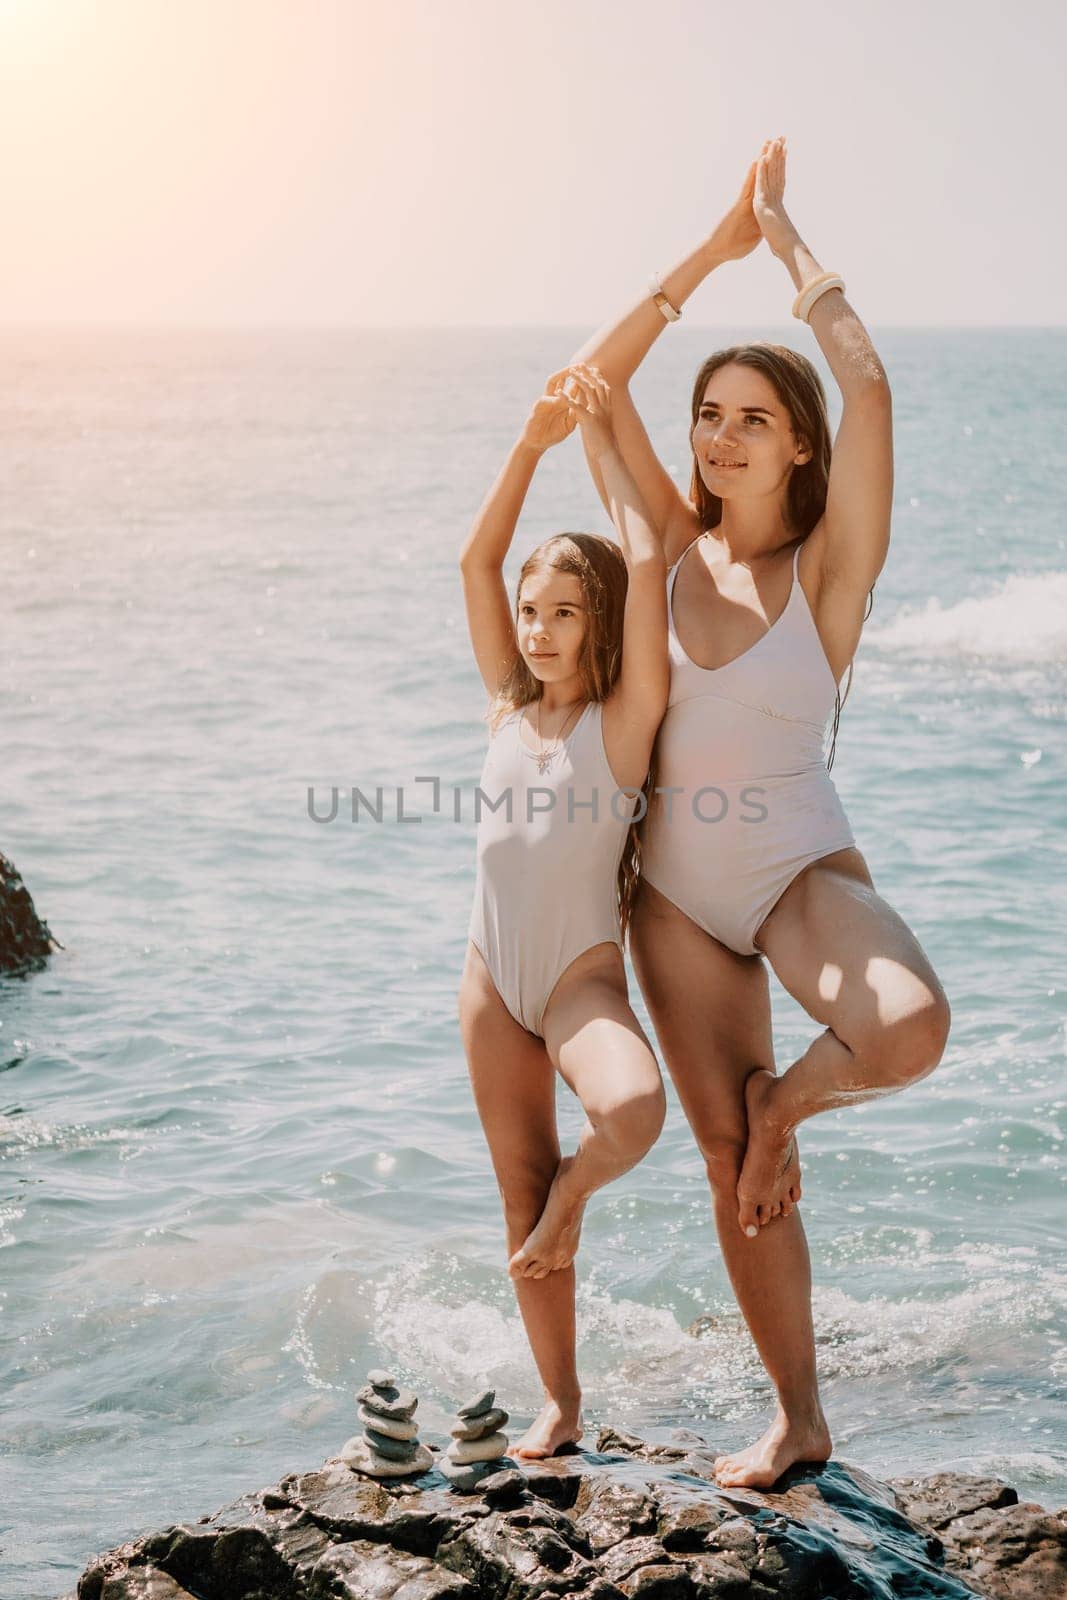 Silhouette mother and daughter doing yoga at beach. Woman on yoga mat in beach meditation, mental health training or mind wellness by ocean, sea